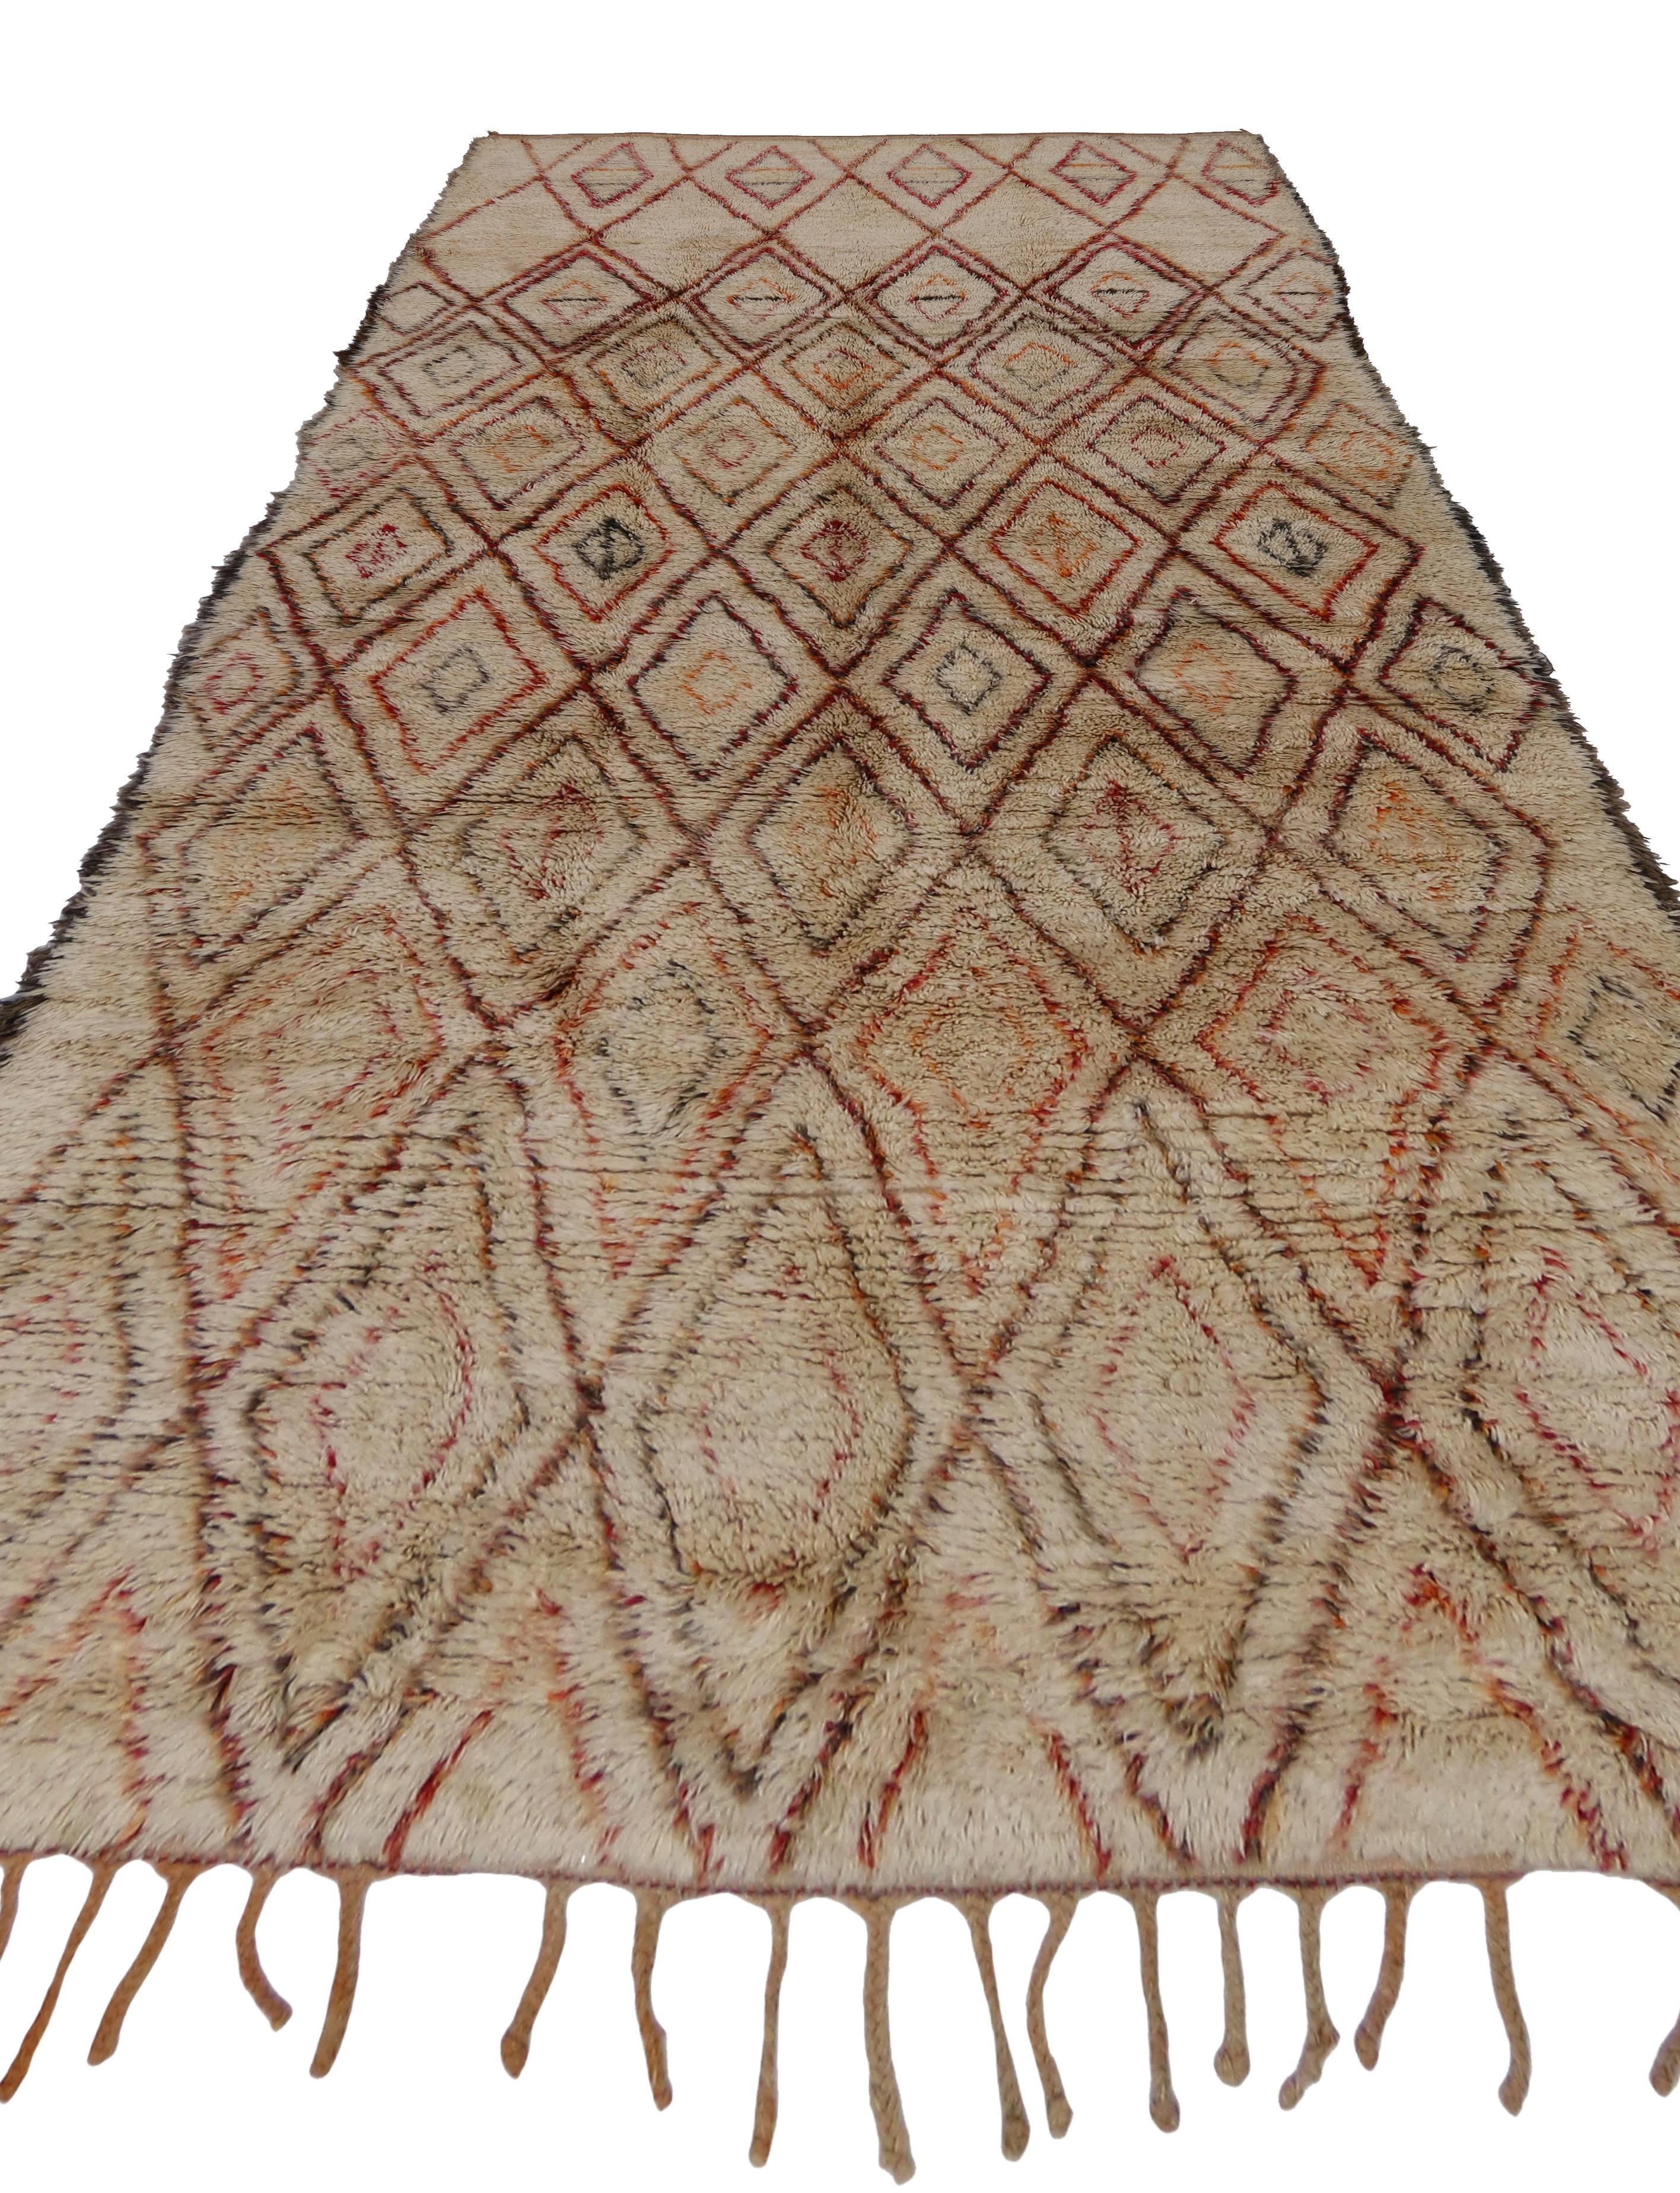 Hand-Knotted Mid-Century Modern Beni Ourain Moroccan Rug with Tribal Designs